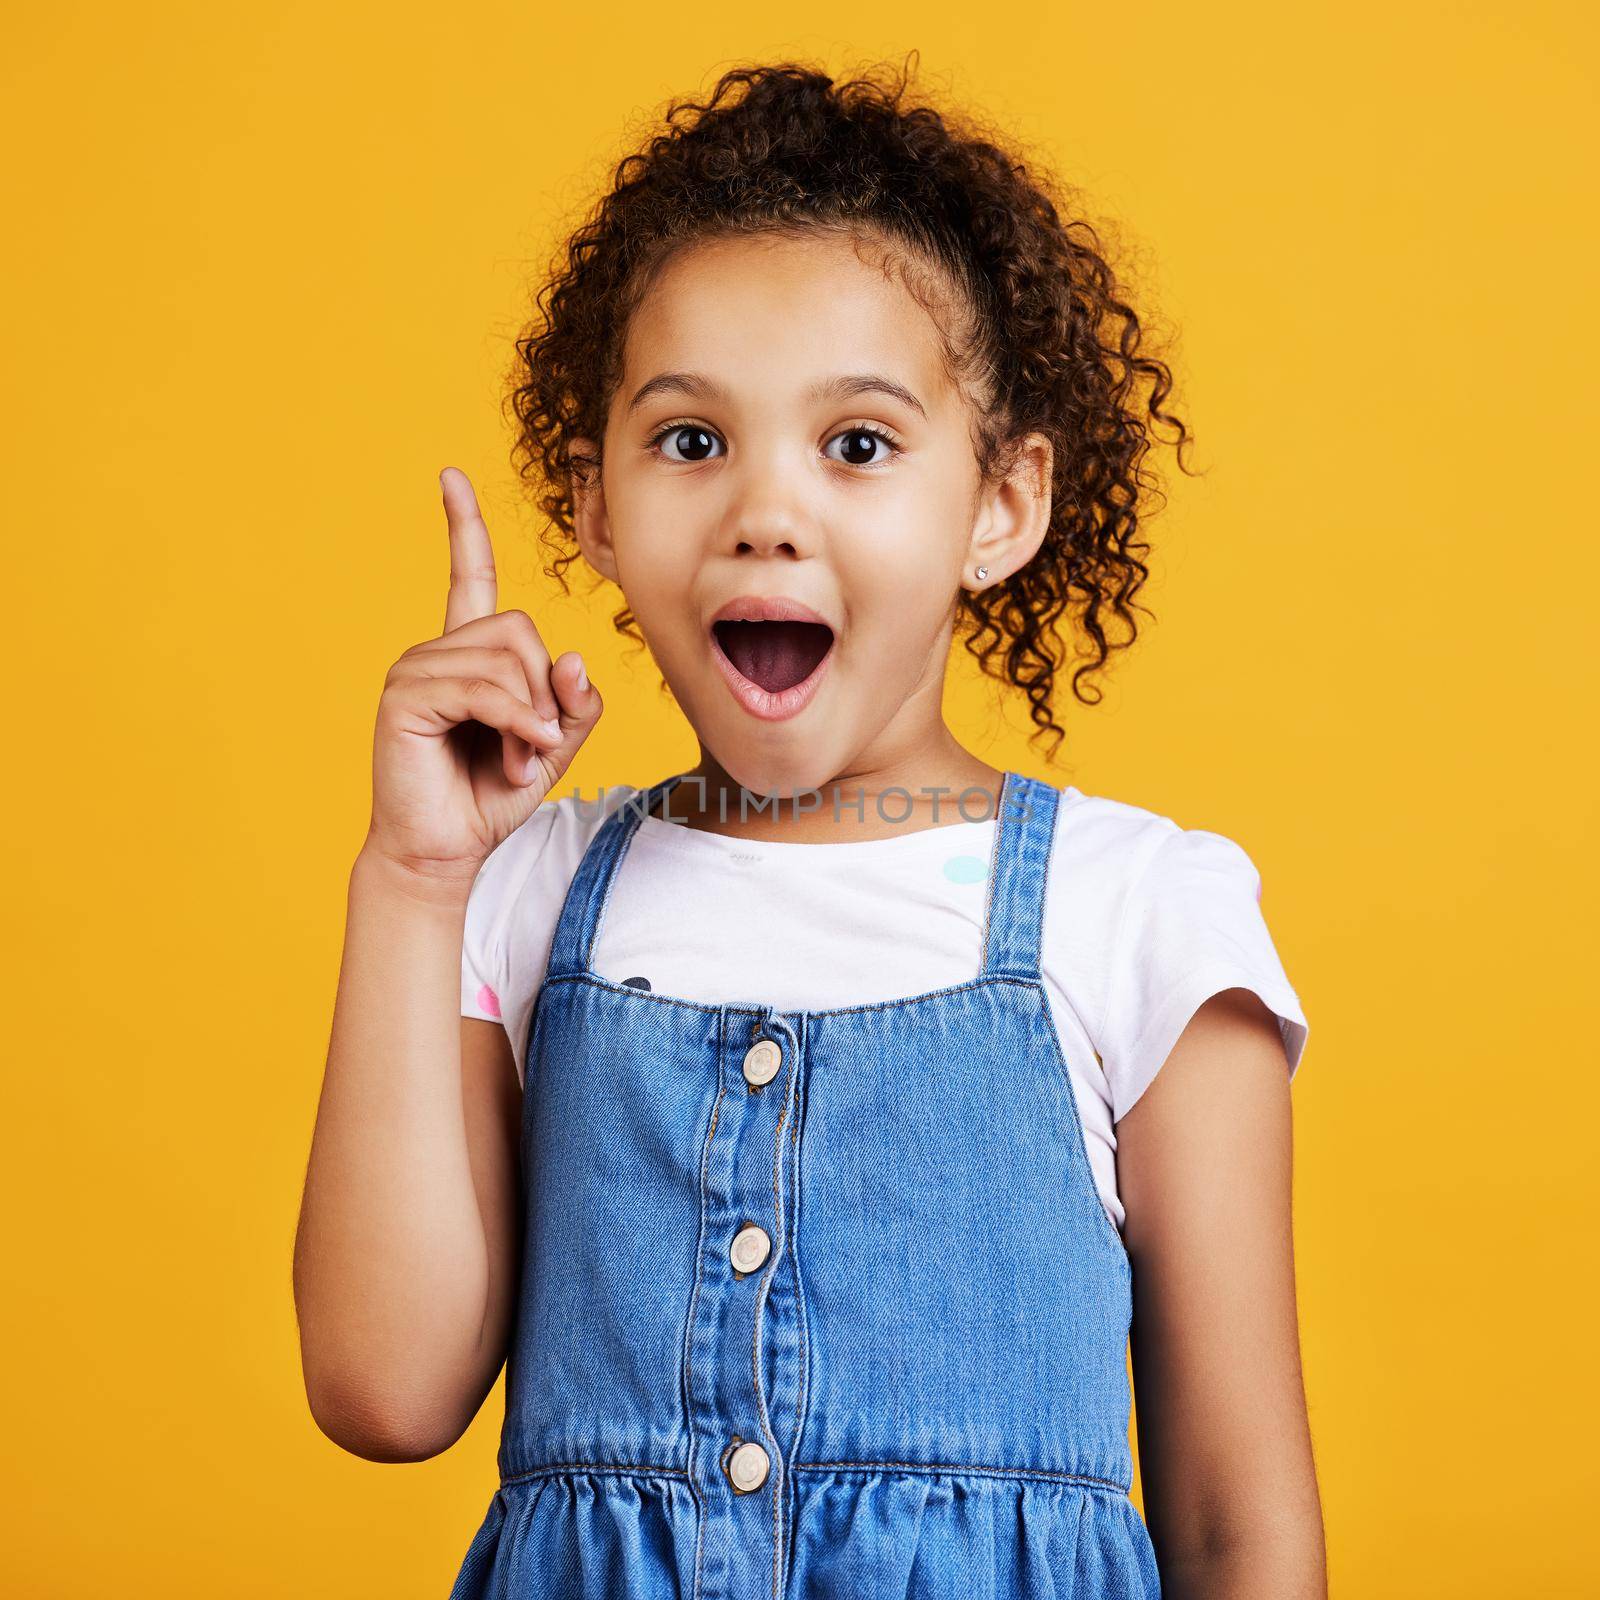 Studio portrait mixed race girl pointing upwards towards copyspace isolated against a yellow background. Cute hispanic child posing inside. Happy and cute kid showing or endorsing a company or product.